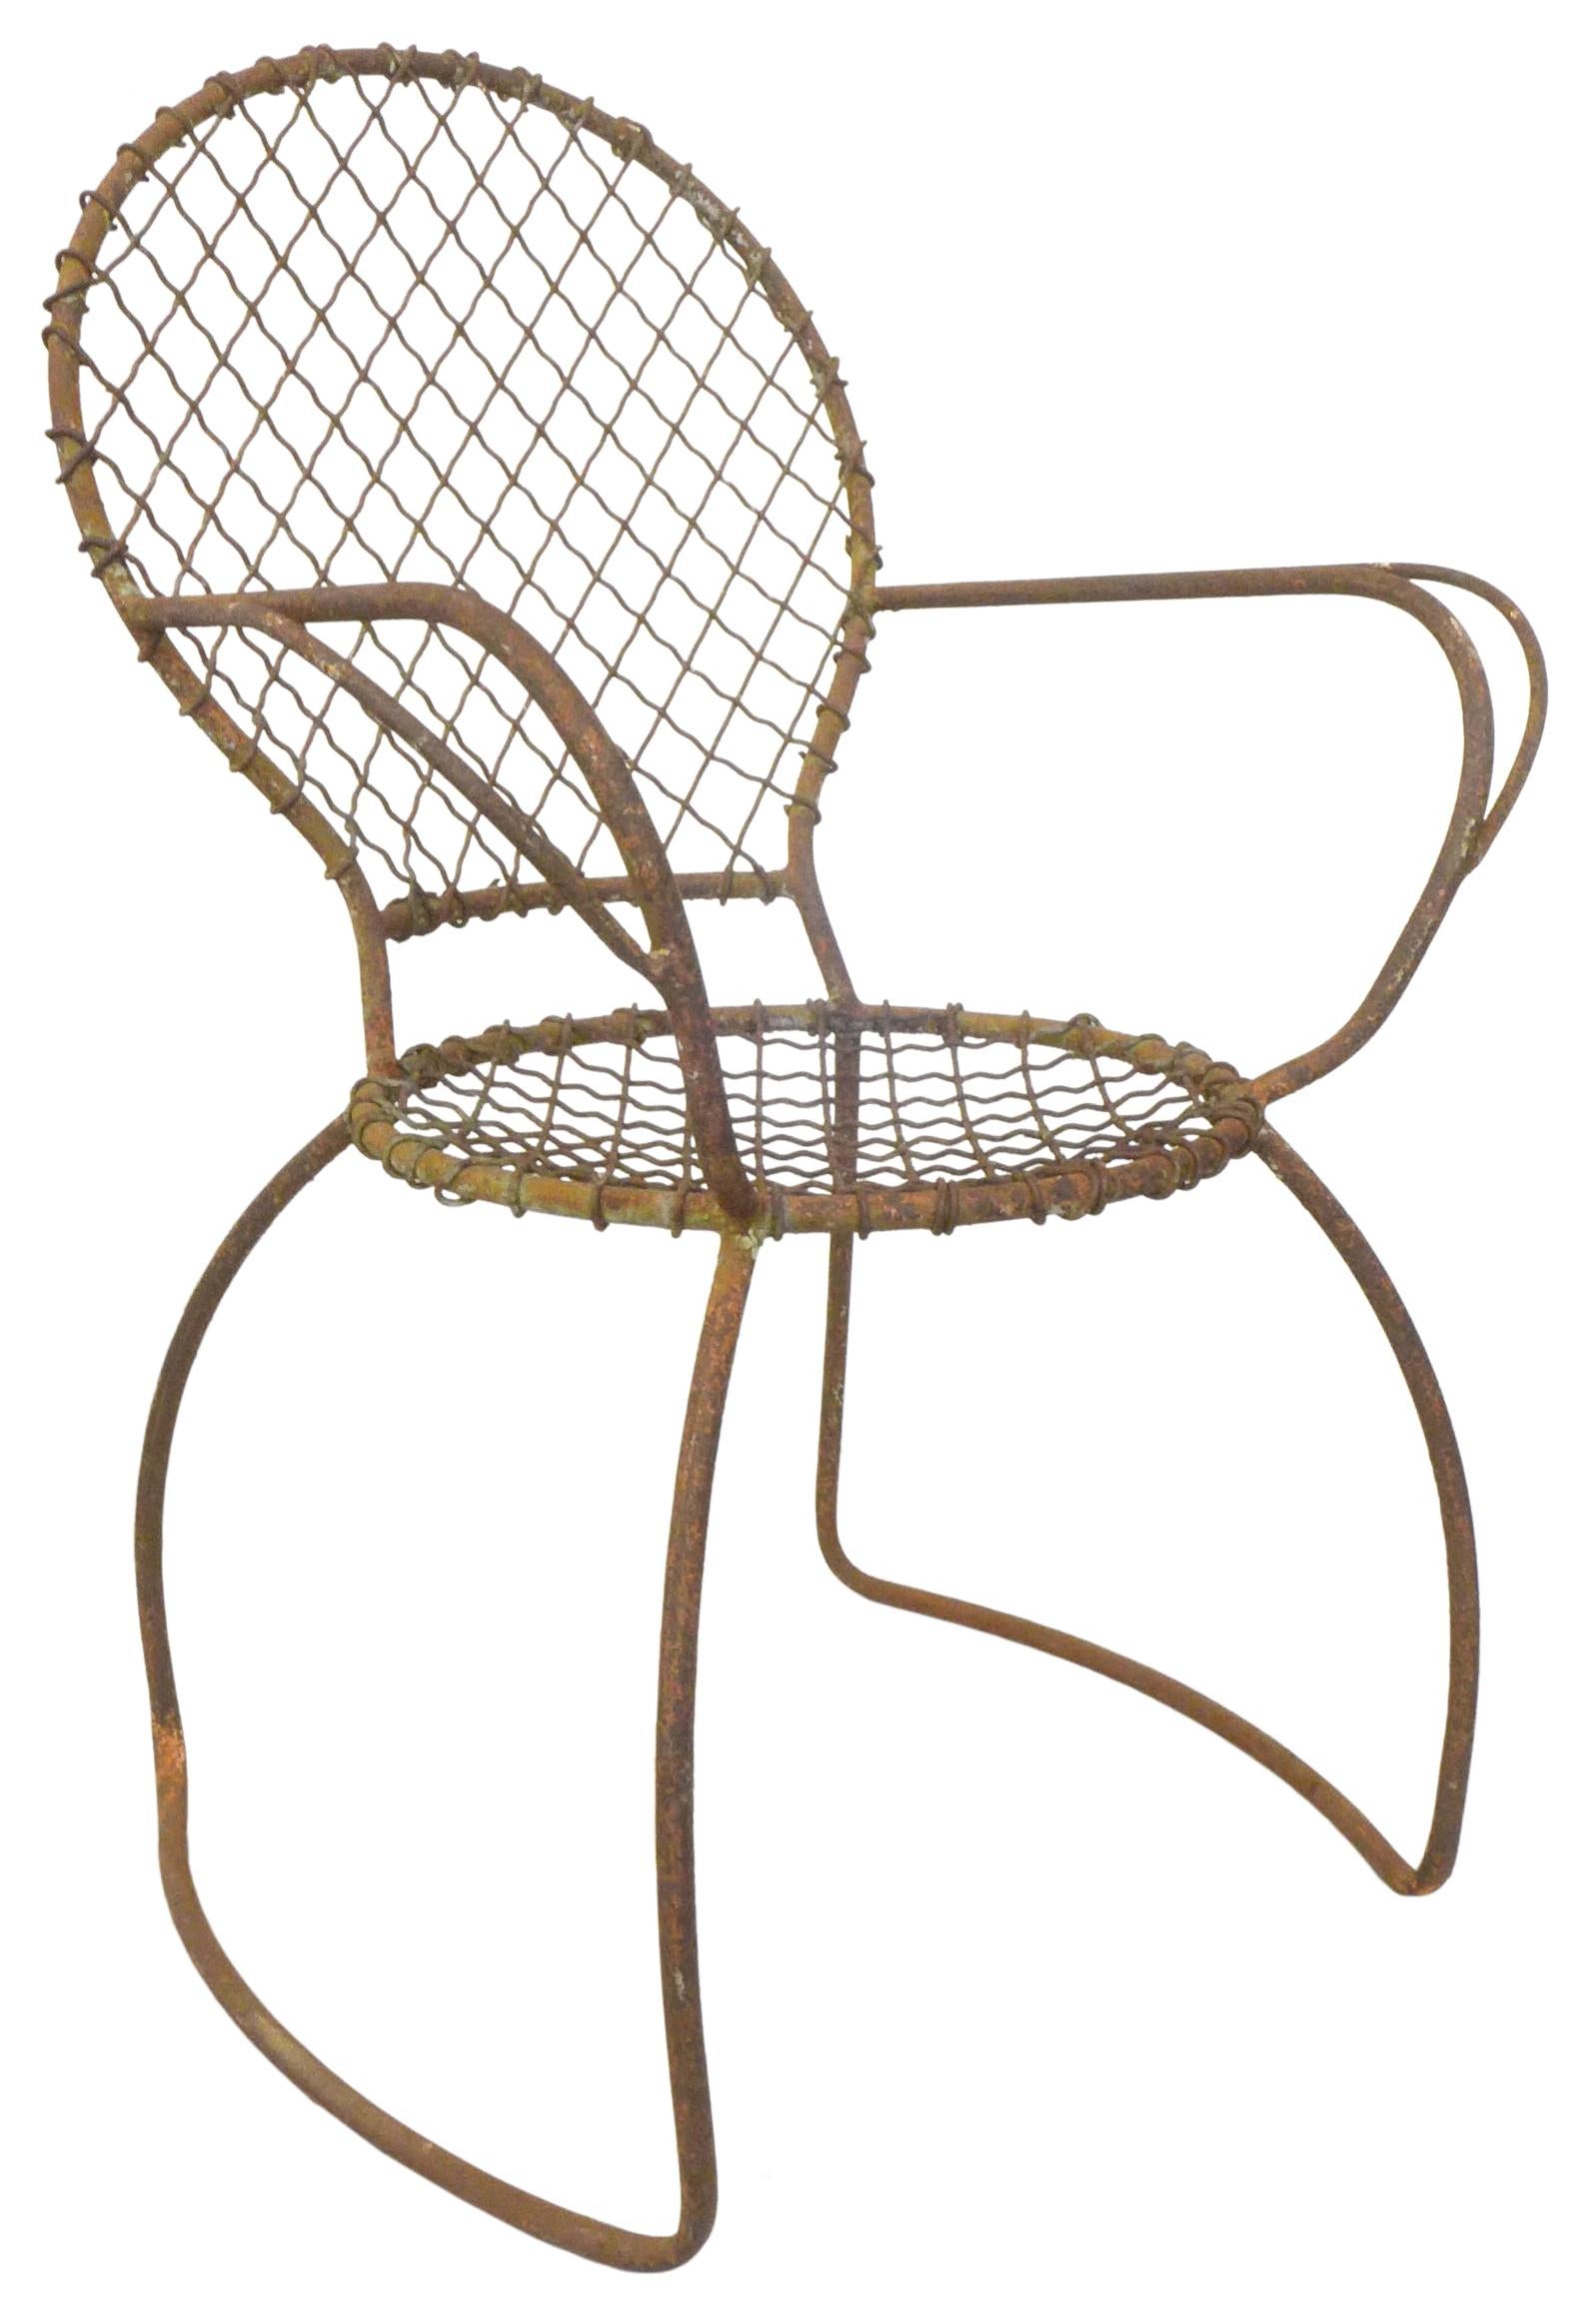 A wonderfully sculptural and playful outdoor chair with unusual decorative lines and form. Constructed of iron tubing with iron mesh elements for the seating and backrest areas. This utilitarian and artful seating design possesses a rich and desired